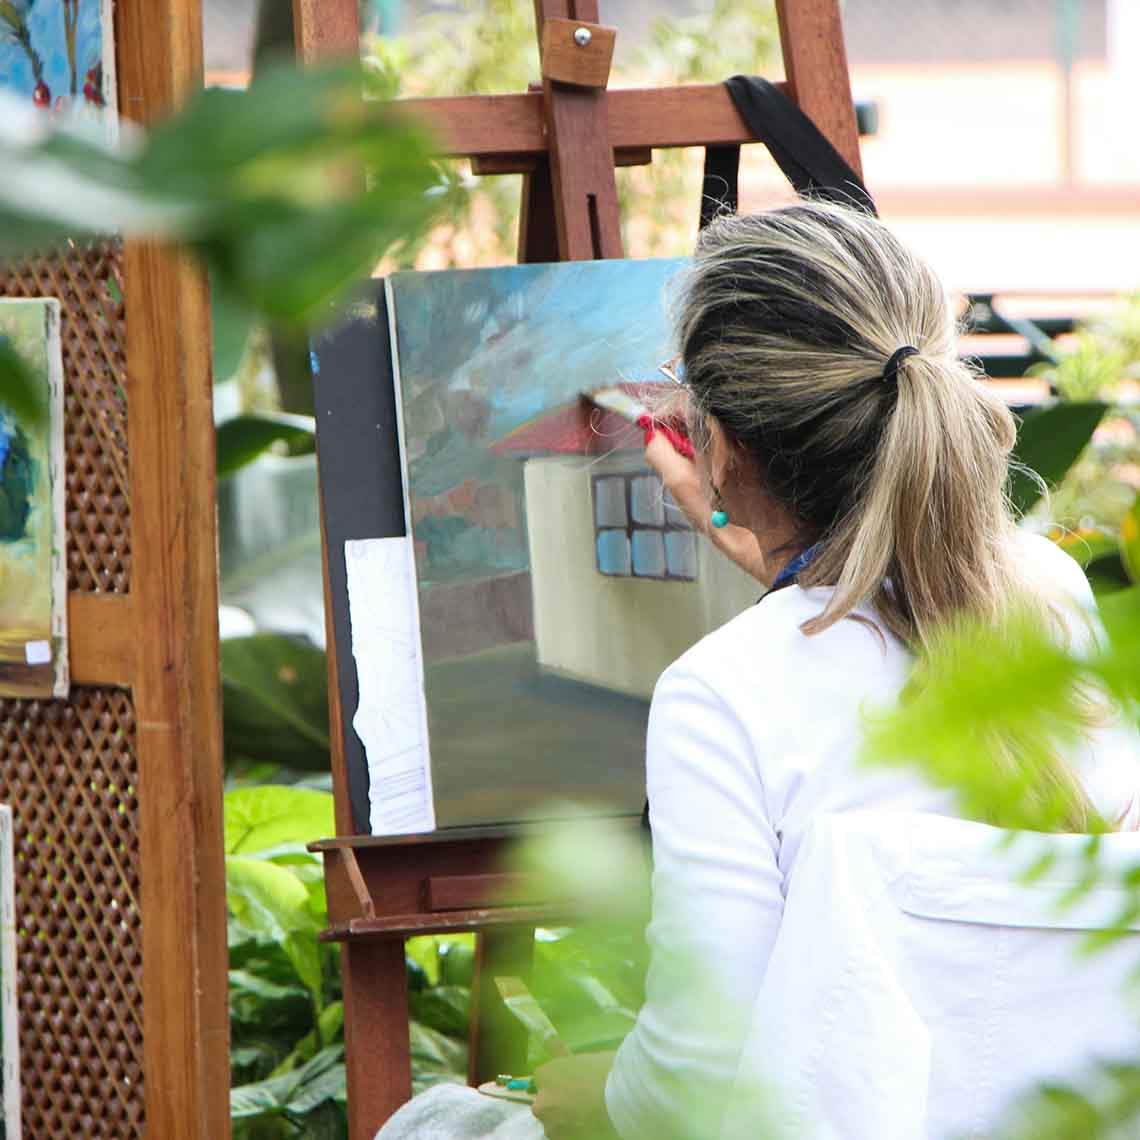 A woman painting a house surrounded by greenery